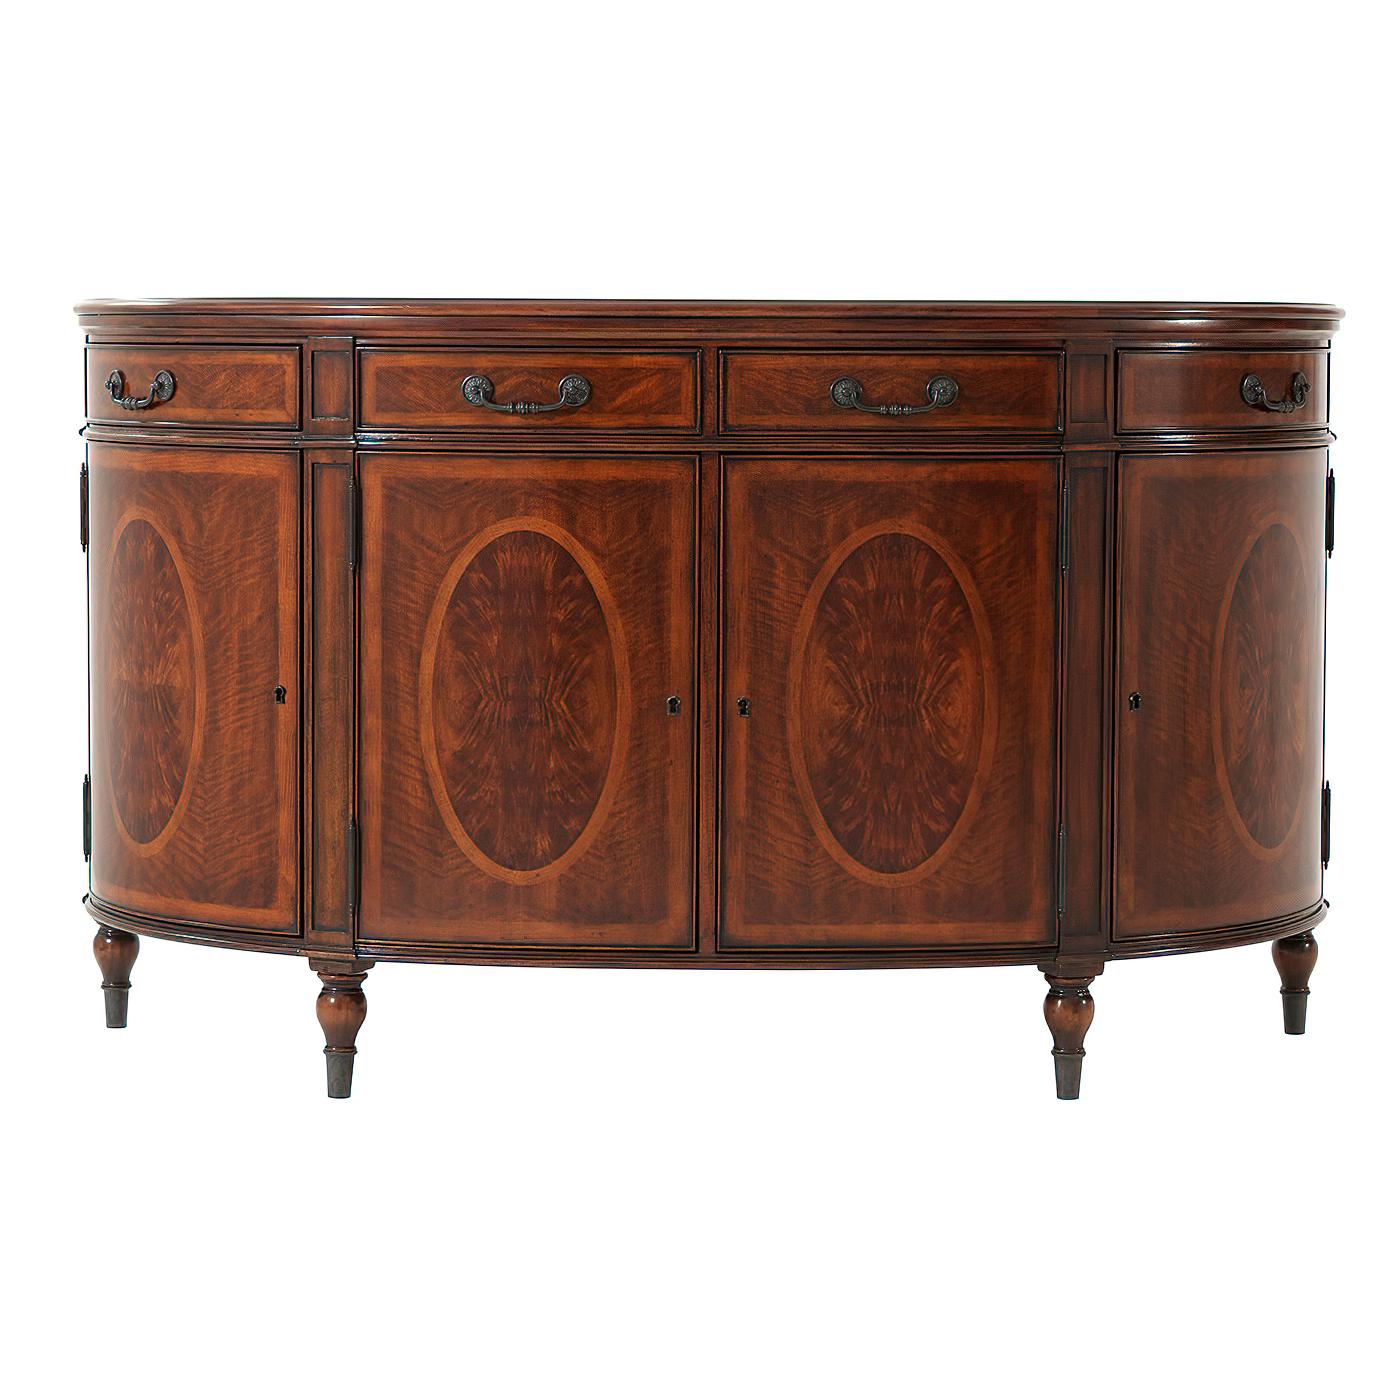 A French Empire style bowfront flame okum veneered and oval pollard oak burl panel inlaid side cabinet or buffet, the brass bound top above three frieze drawers above four cabinet doors enclosing three adjustable shelves, flanked by brass mounted